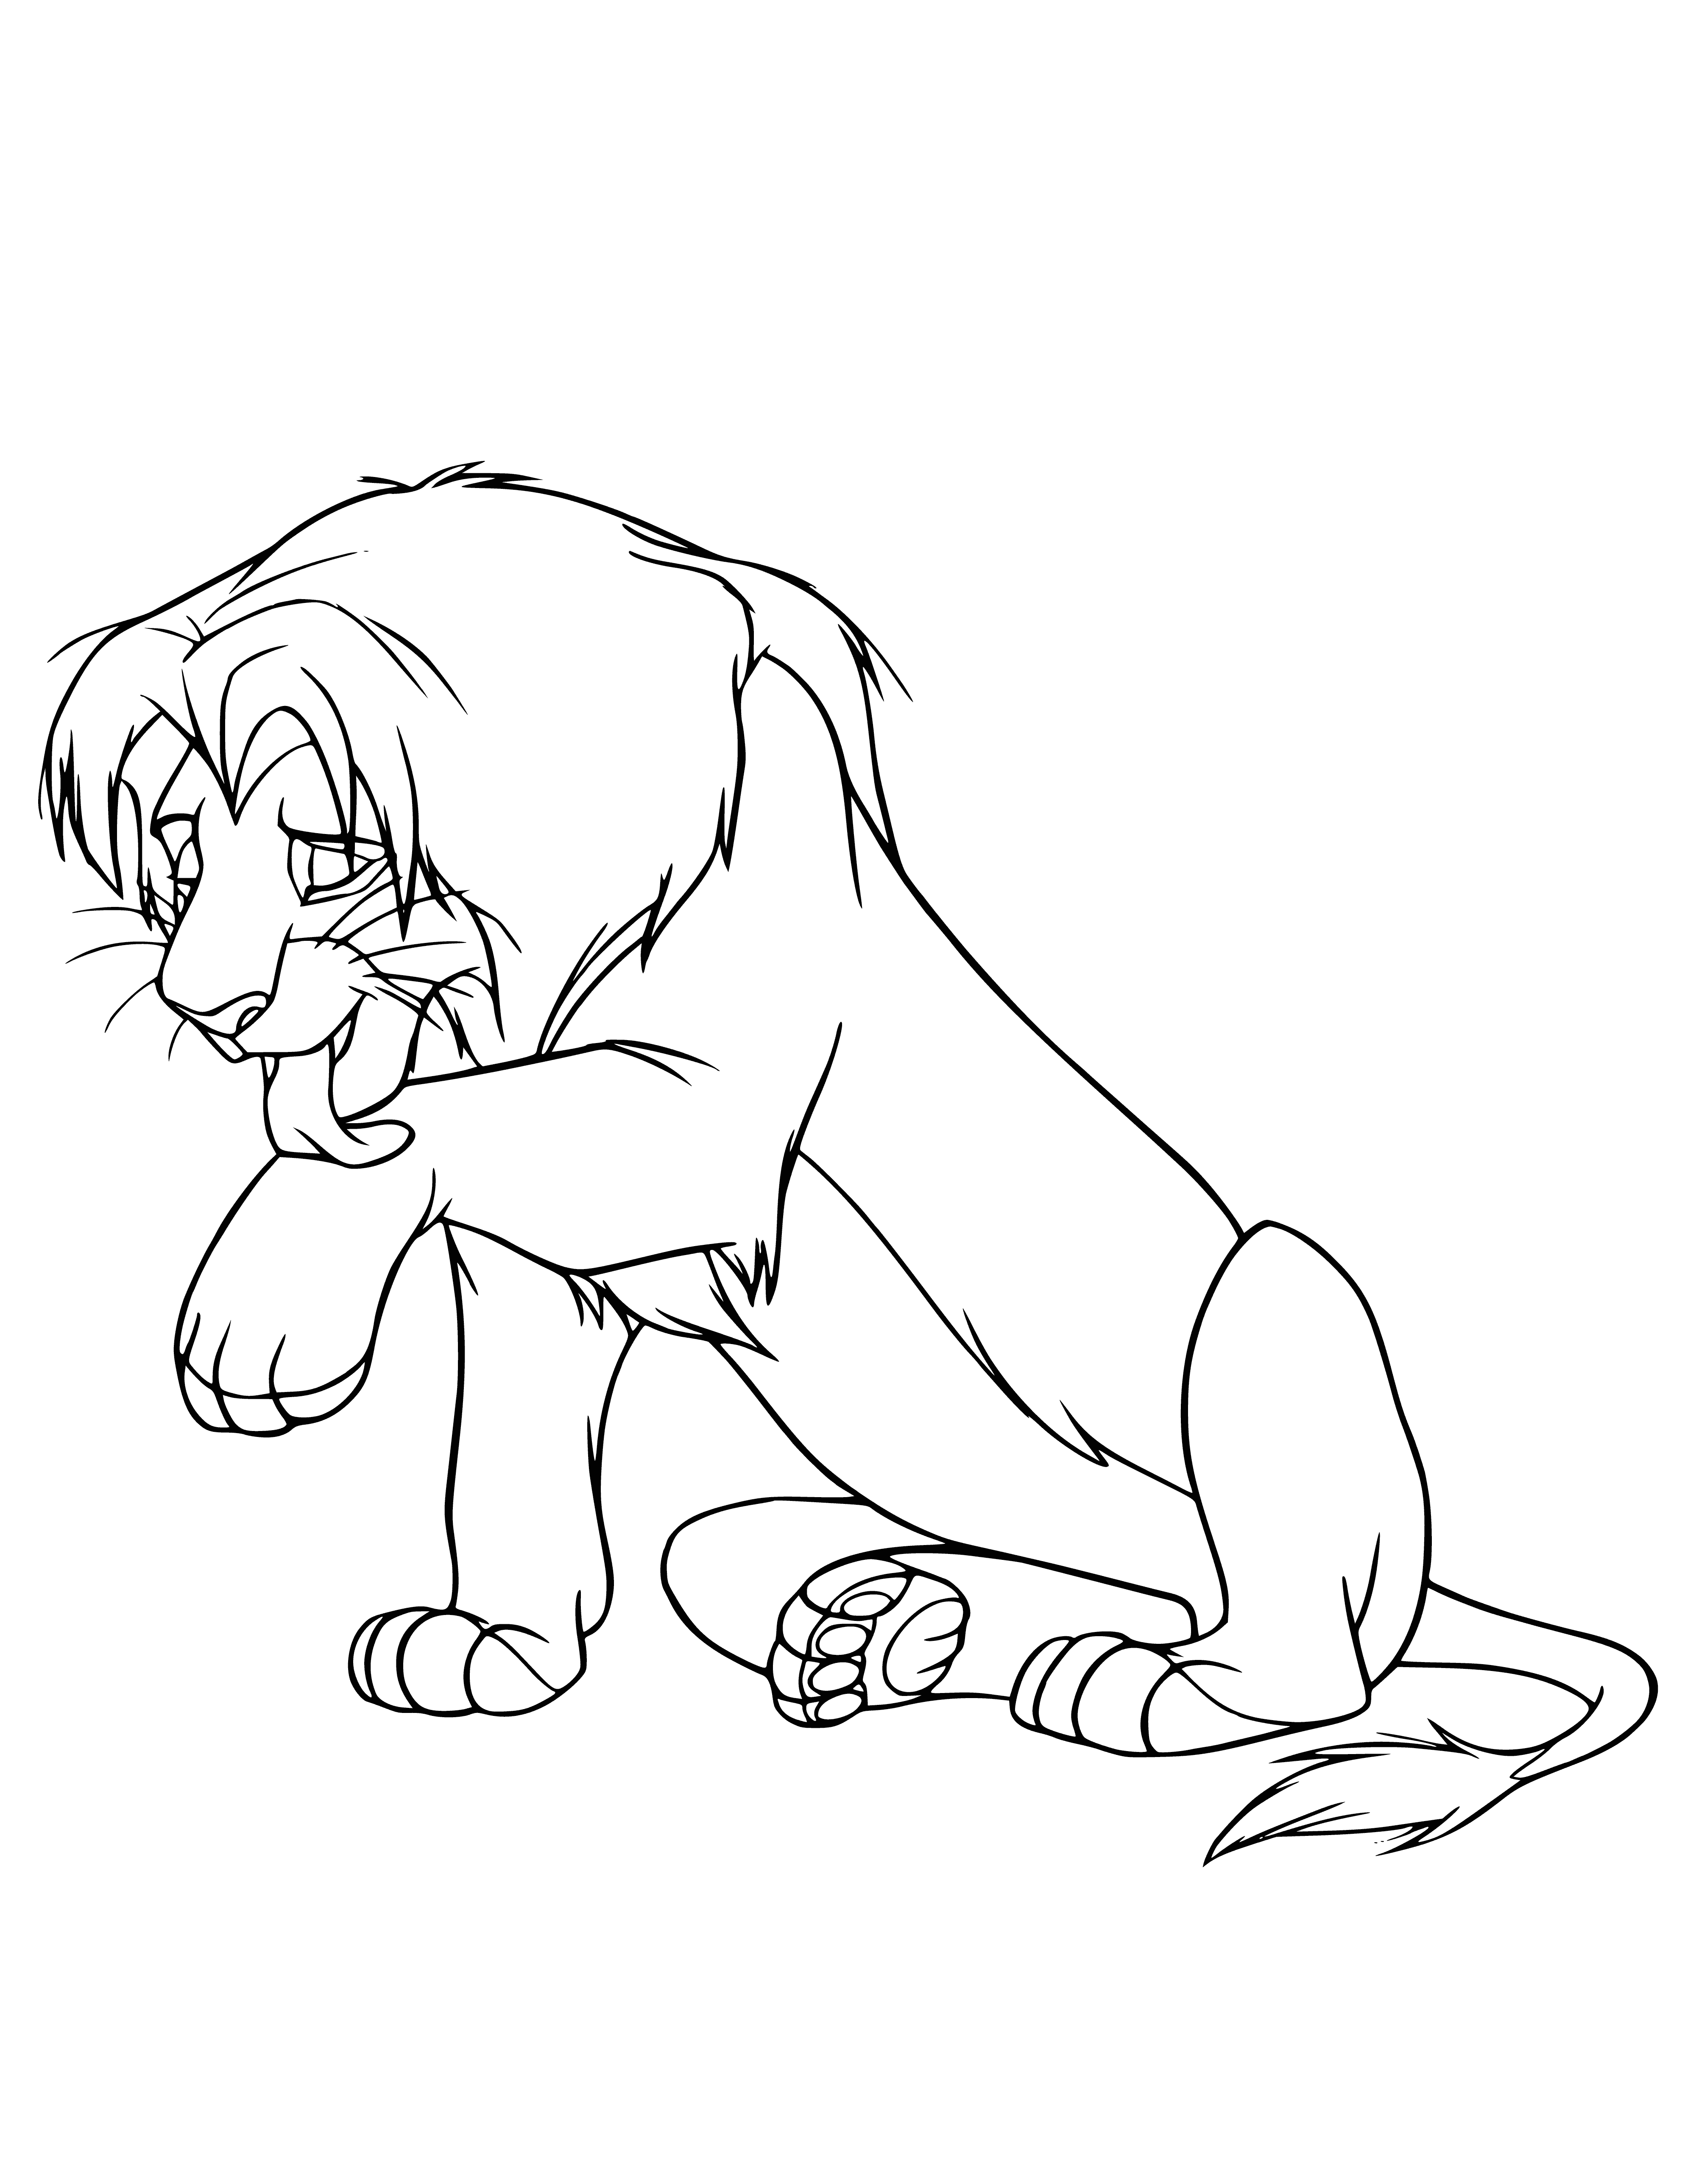 coloring page: The Lion King is licking his paw in this cozy coloring page. Closed eyes & relaxed expression show he's content.